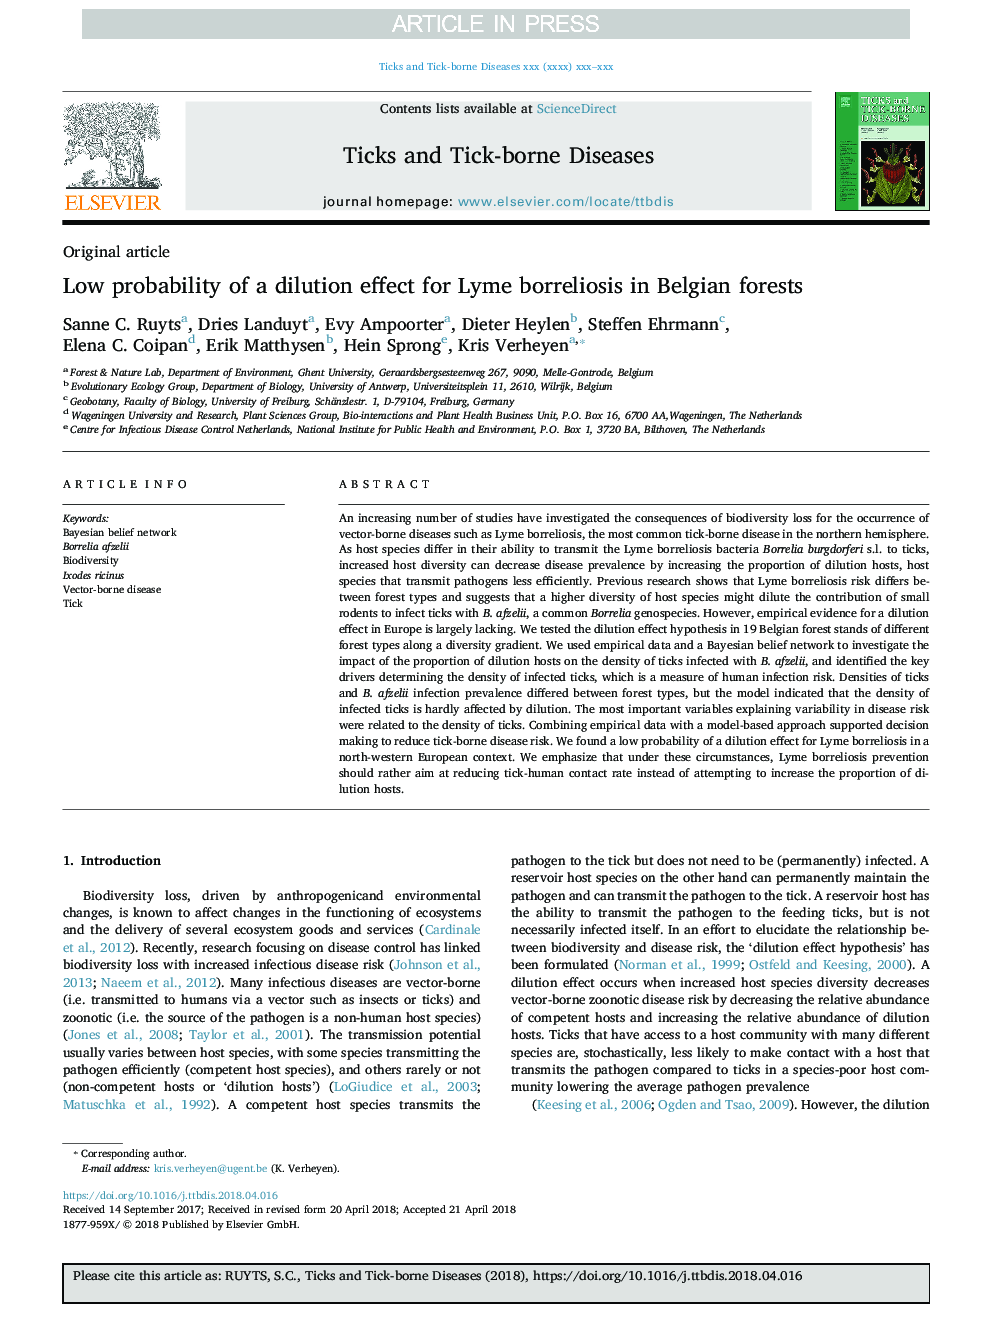 Low probability of a dilution effect for Lyme borreliosis in Belgian forests